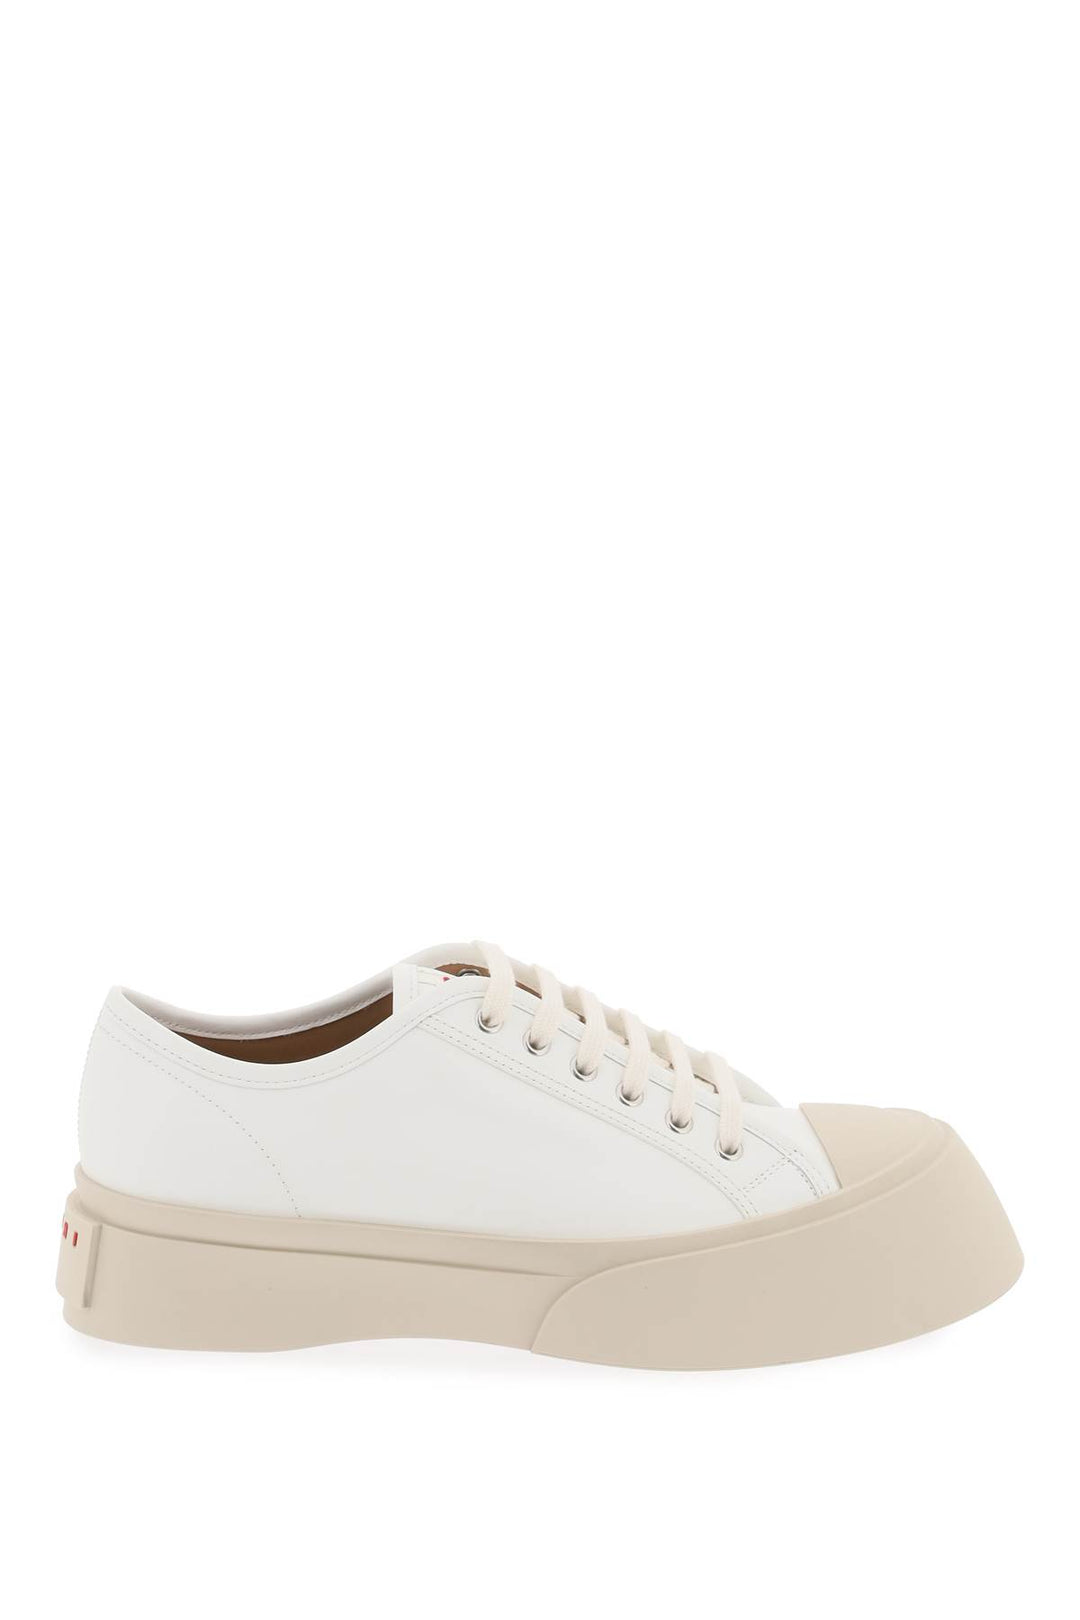 leather pablo sneakers-0